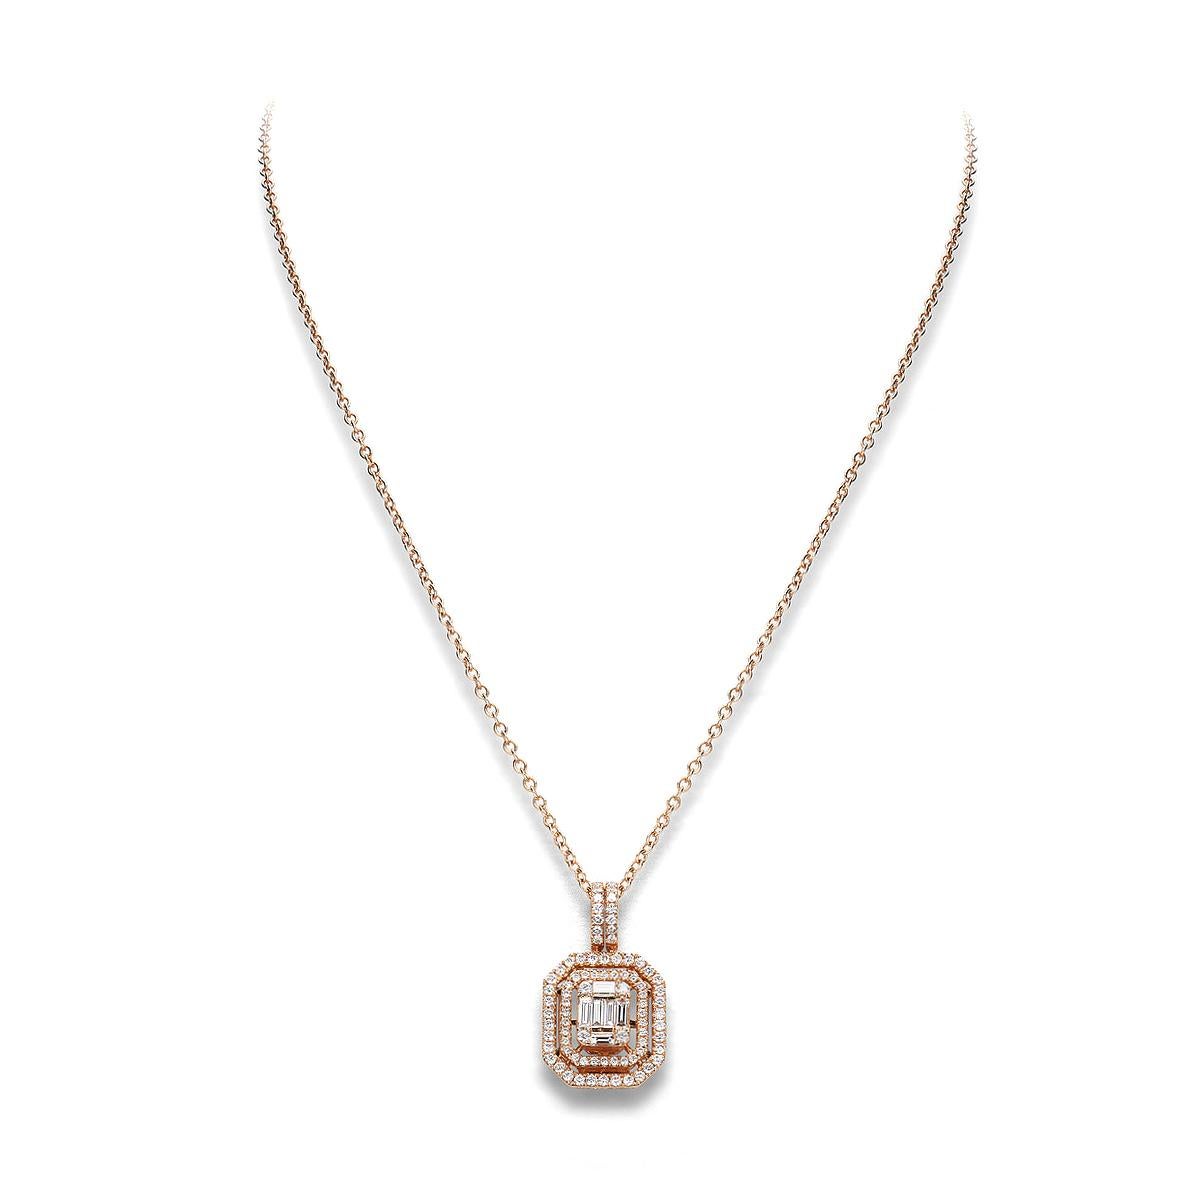 Pendant in 18kt pink gold set with 84 diamonds 0.77 cts and 6 baguette cut diamonds 0.38 cts   